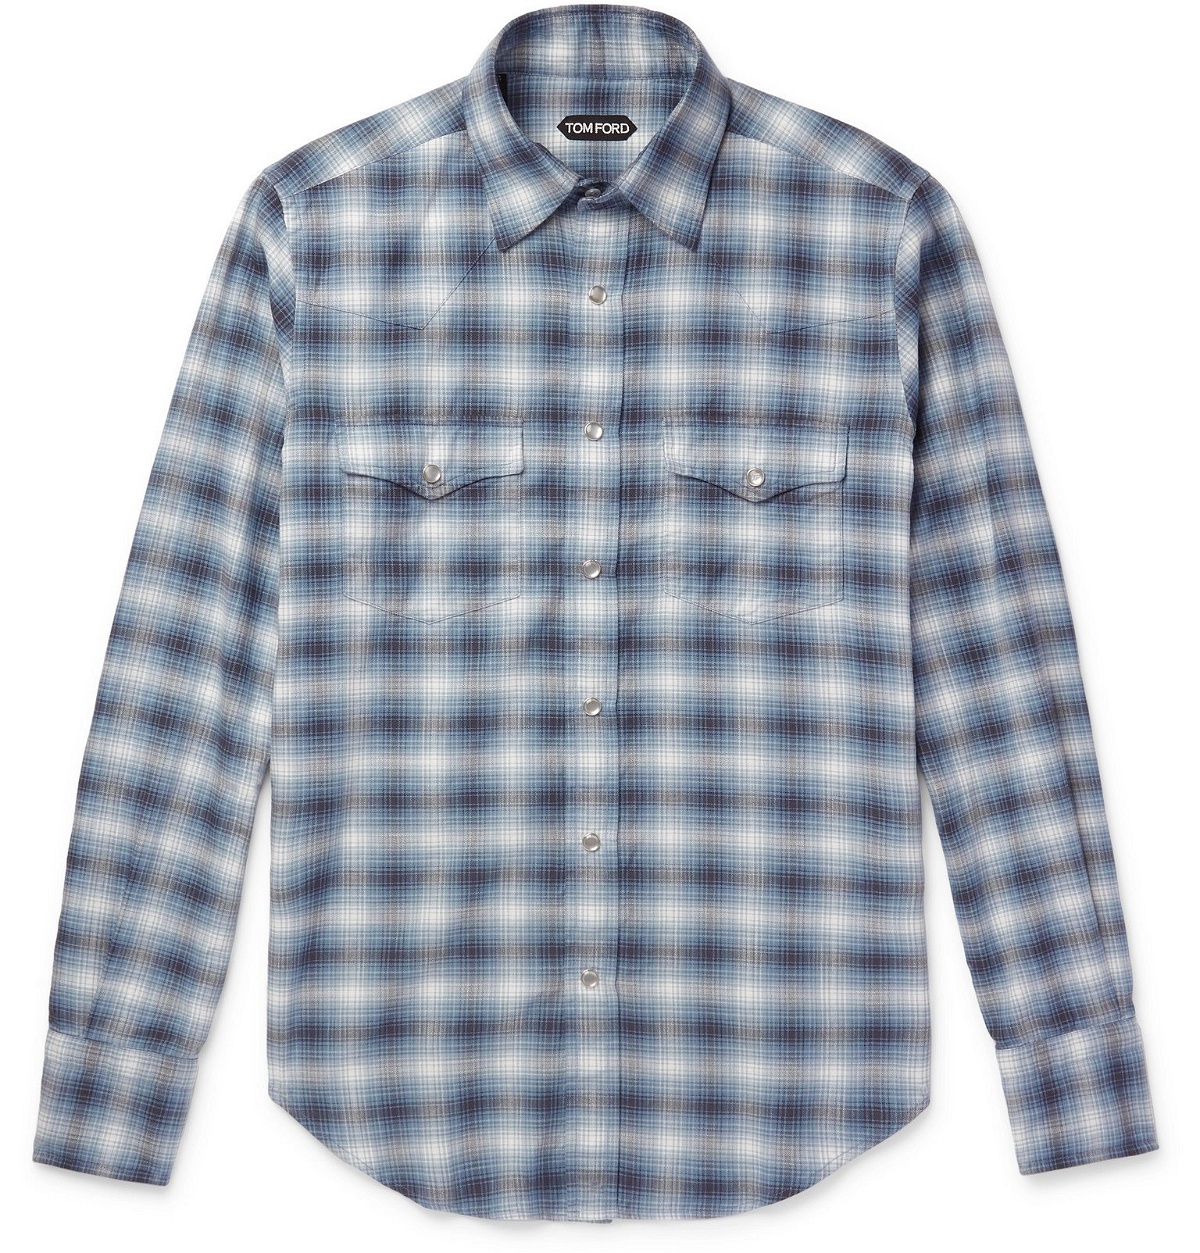 TOM FORD - Slim-Fit Checked Cotton Western Shirt - Blue TOM FORD